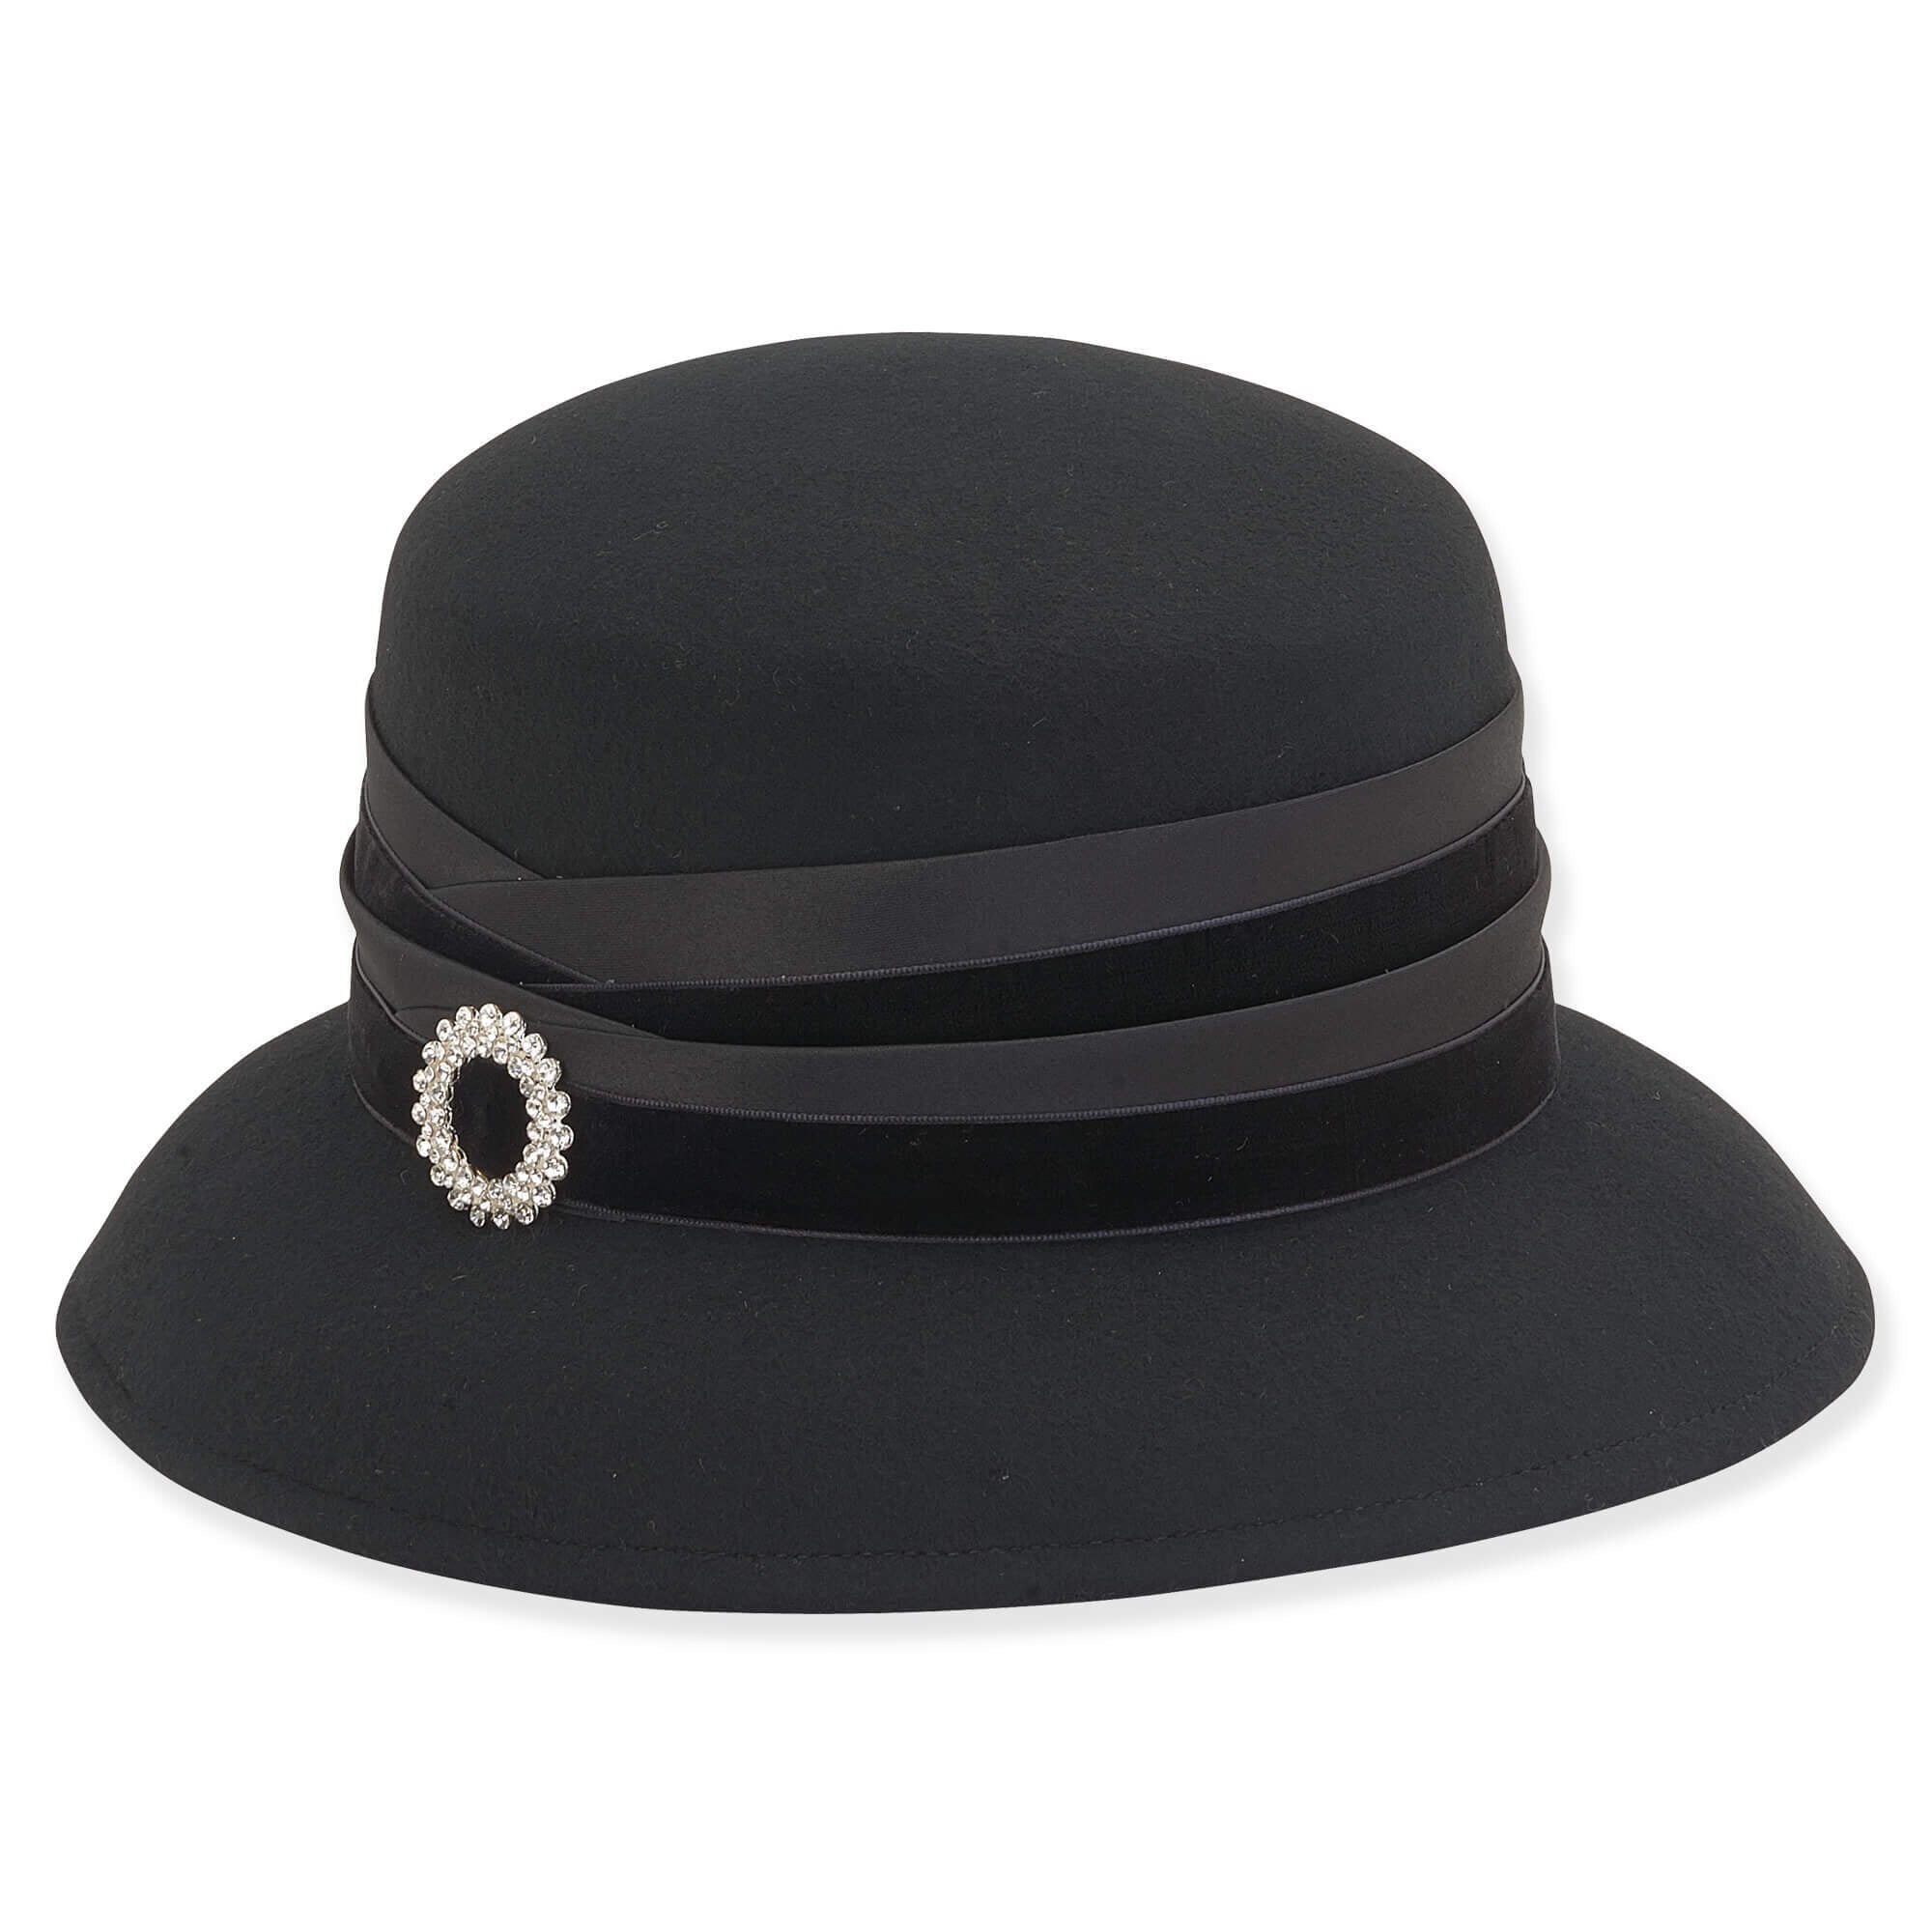 Wool Felt Tiffany Hat with Velvet Band and Brooch - Adora® Hats Cloche Adora Hats AD1089A Black  